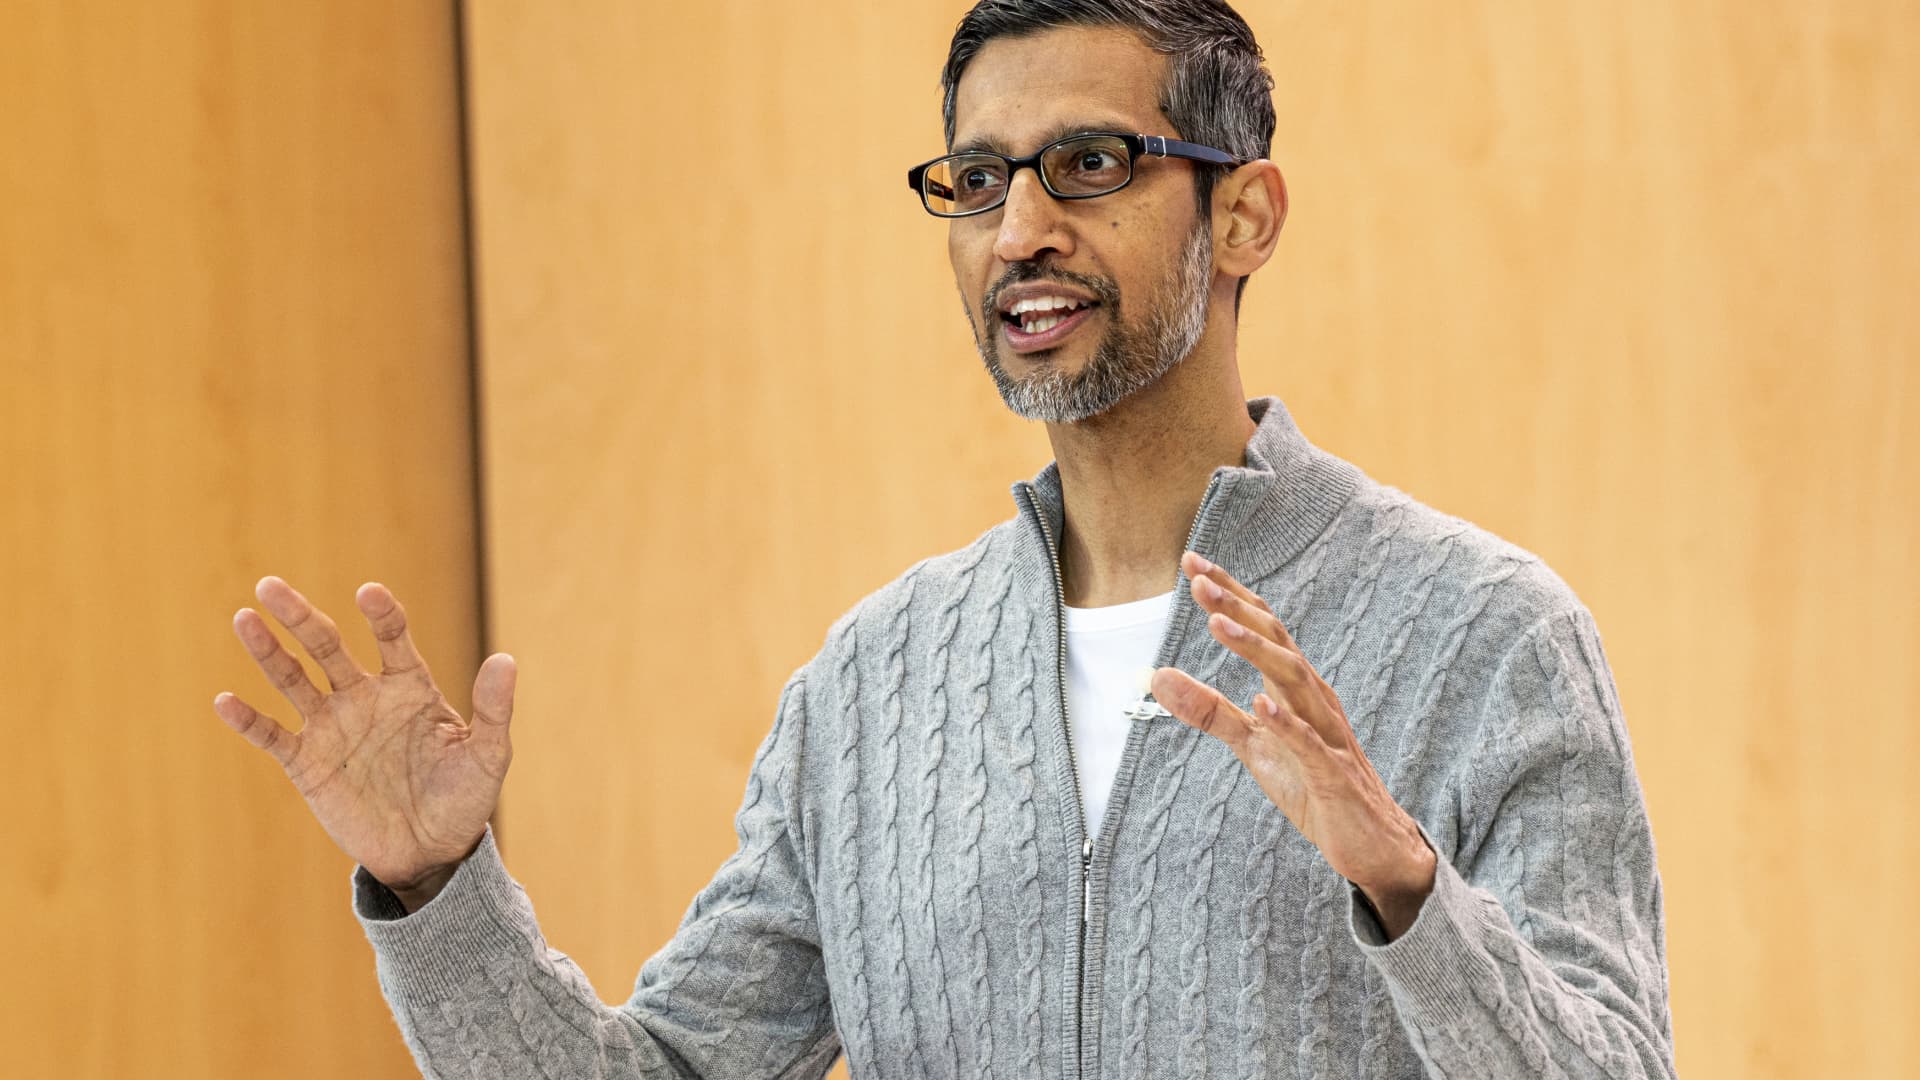 Alphabet reports better-than-expected quarterly results driven by growth in cloud